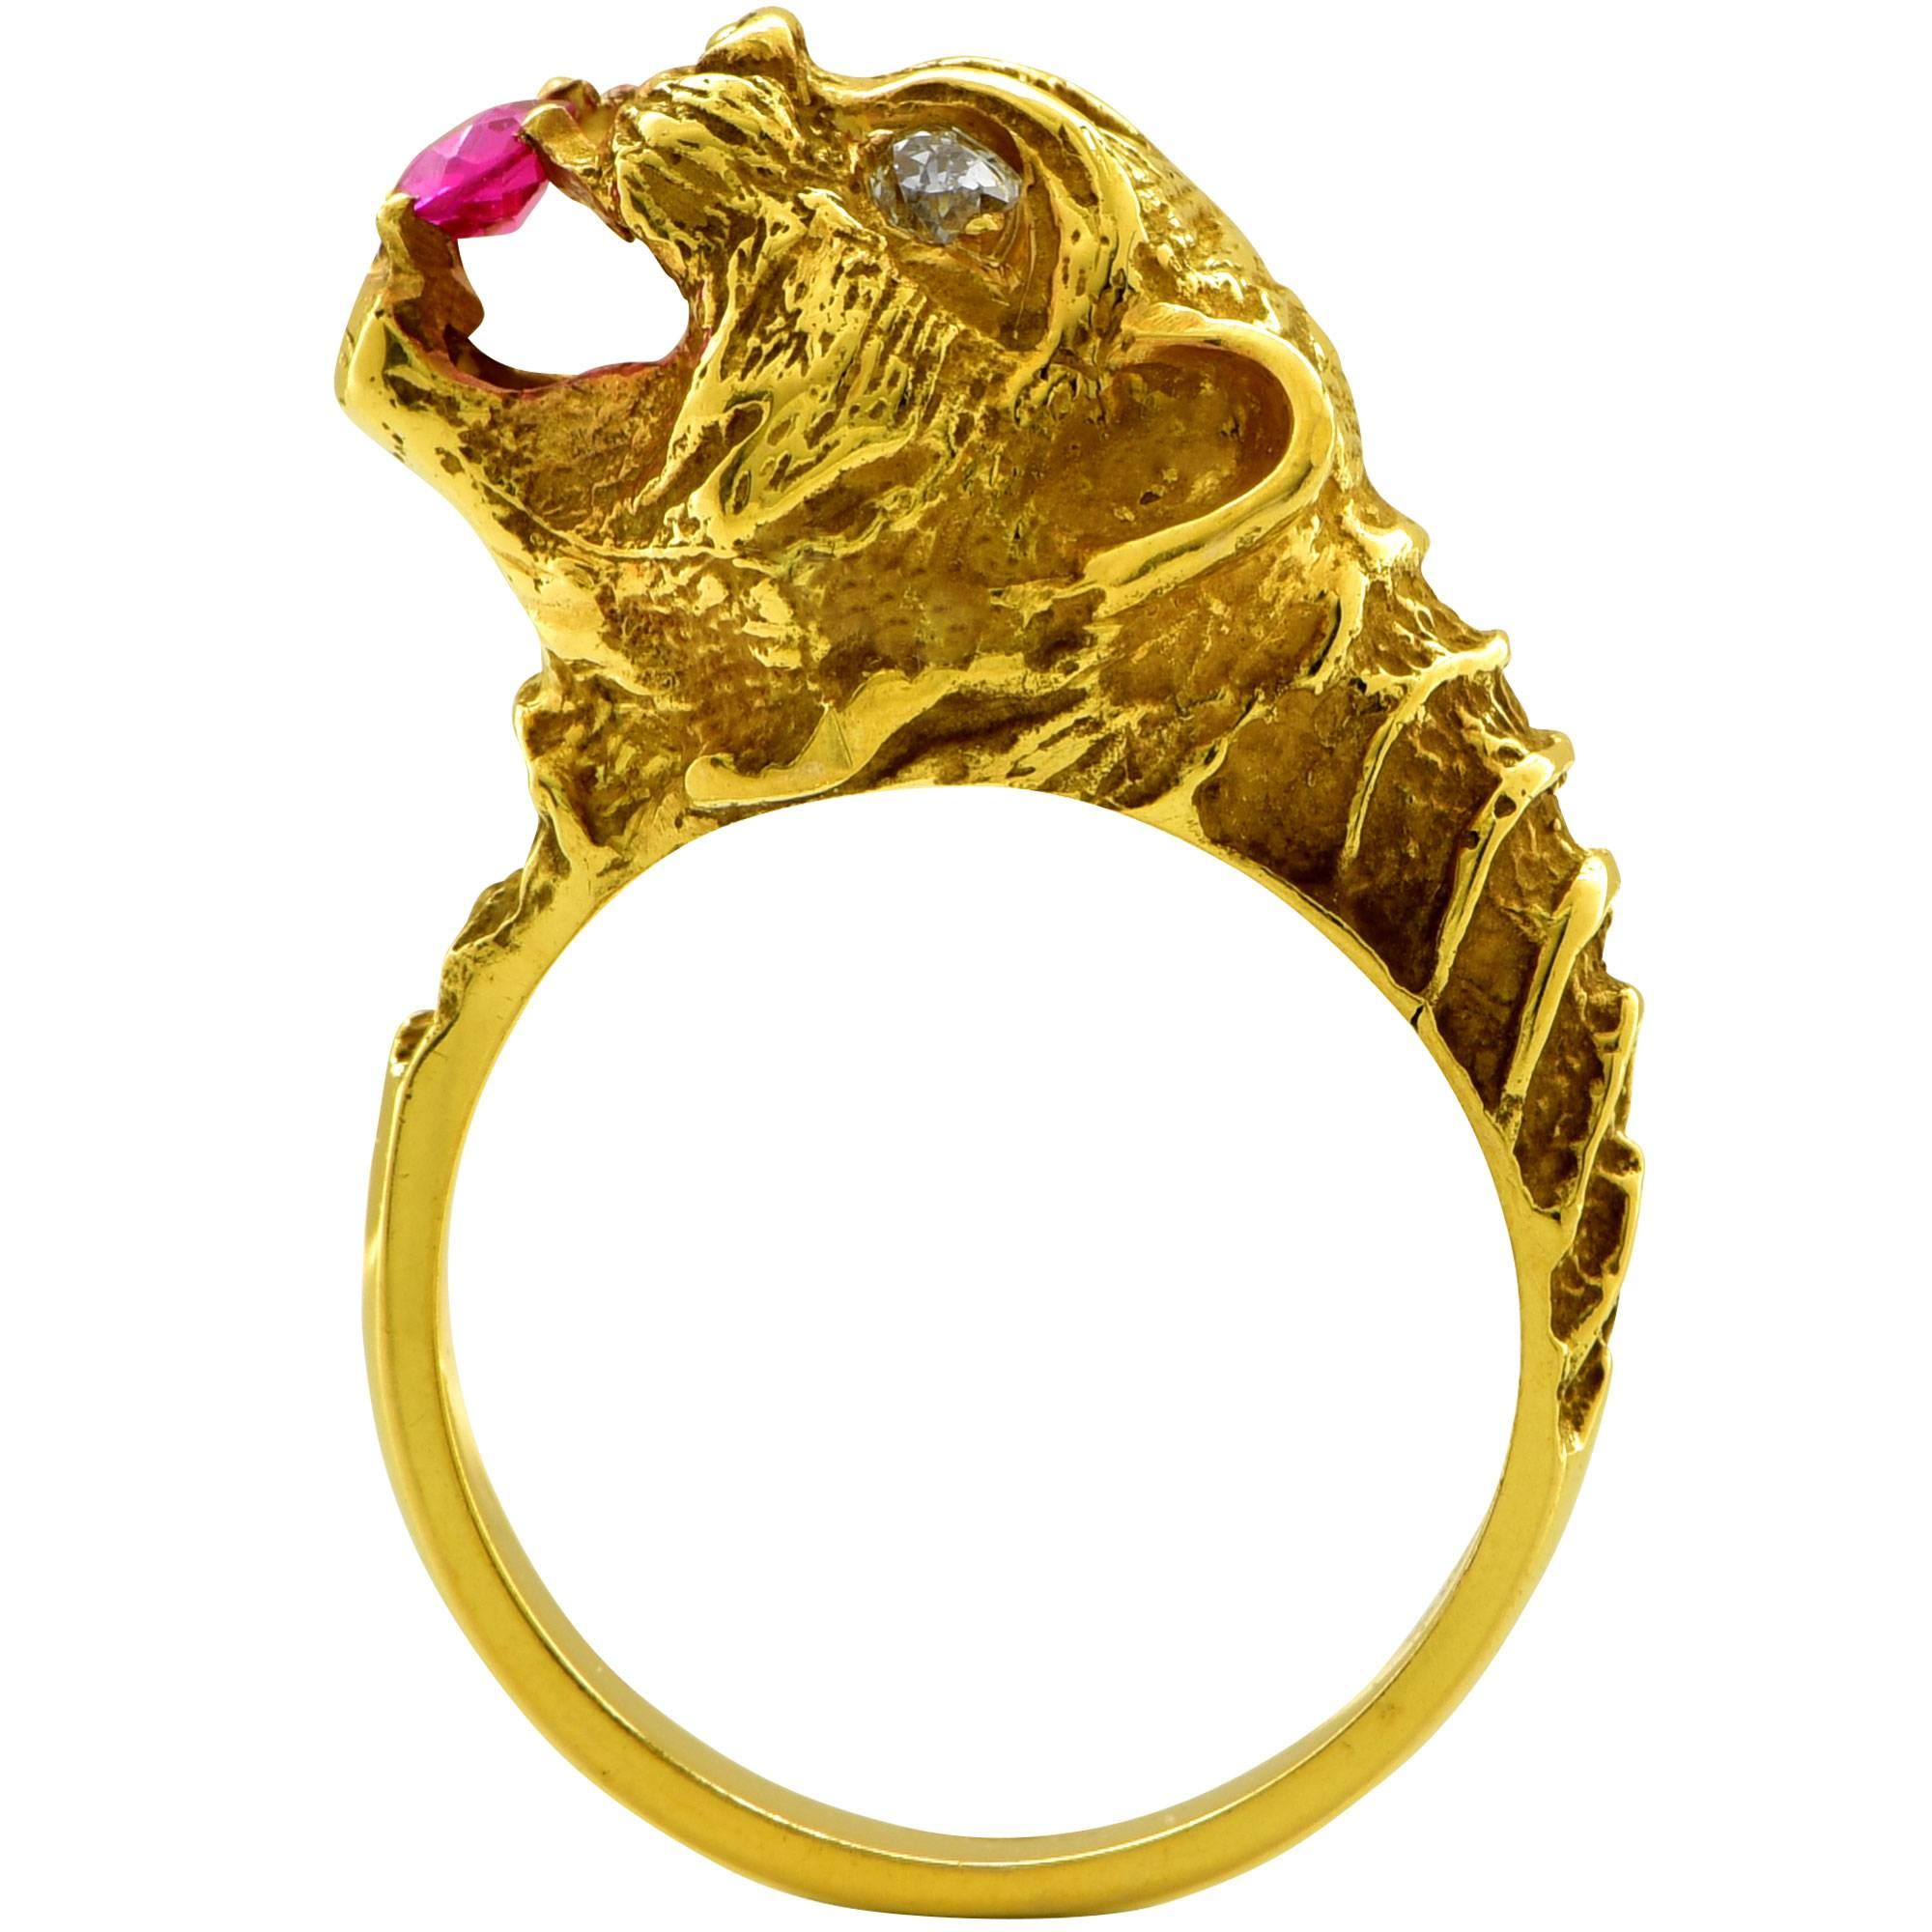 18k yellow gold Lion ring featuring a round cut synthetic ruby weighing approximately .15cts accented by 2 European cut diamonds weighing approximately .20cts total, G color SI clarity.

The ring is a size 7 and can be sized up or down.
It is